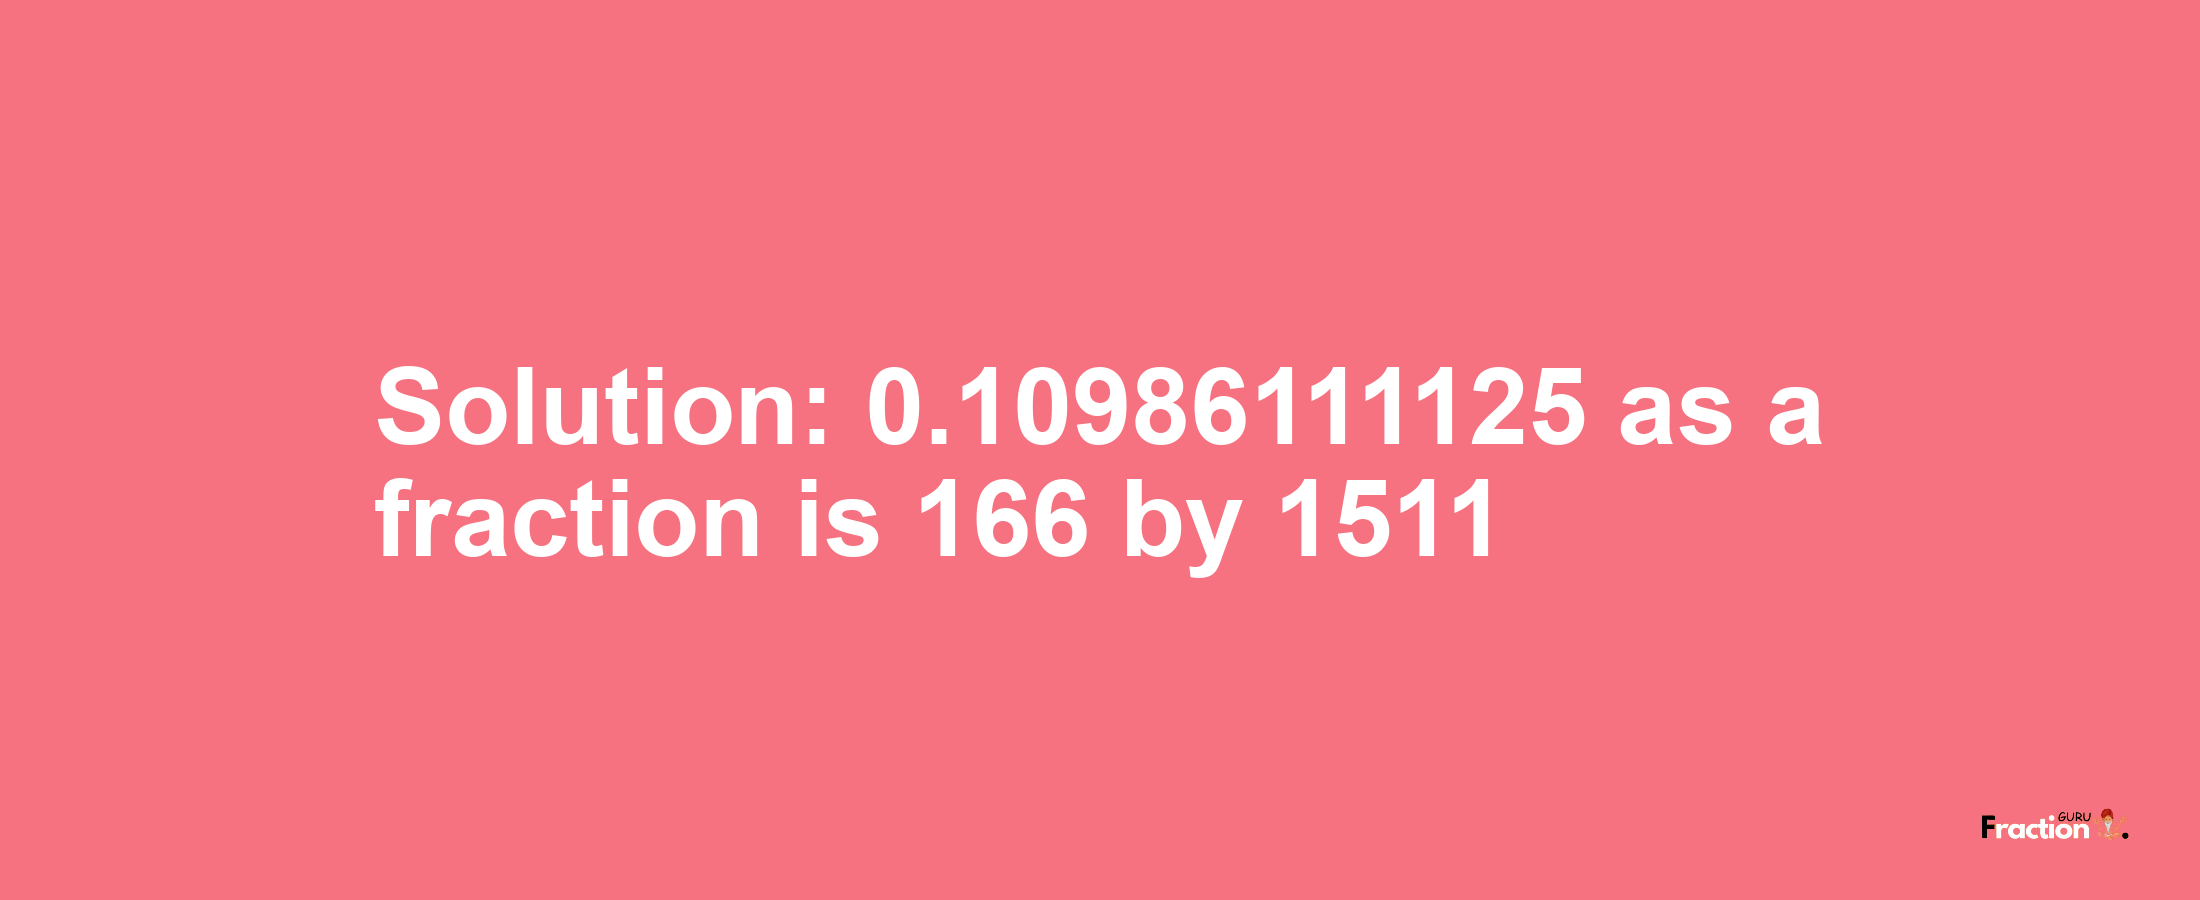 Solution:0.10986111125 as a fraction is 166/1511